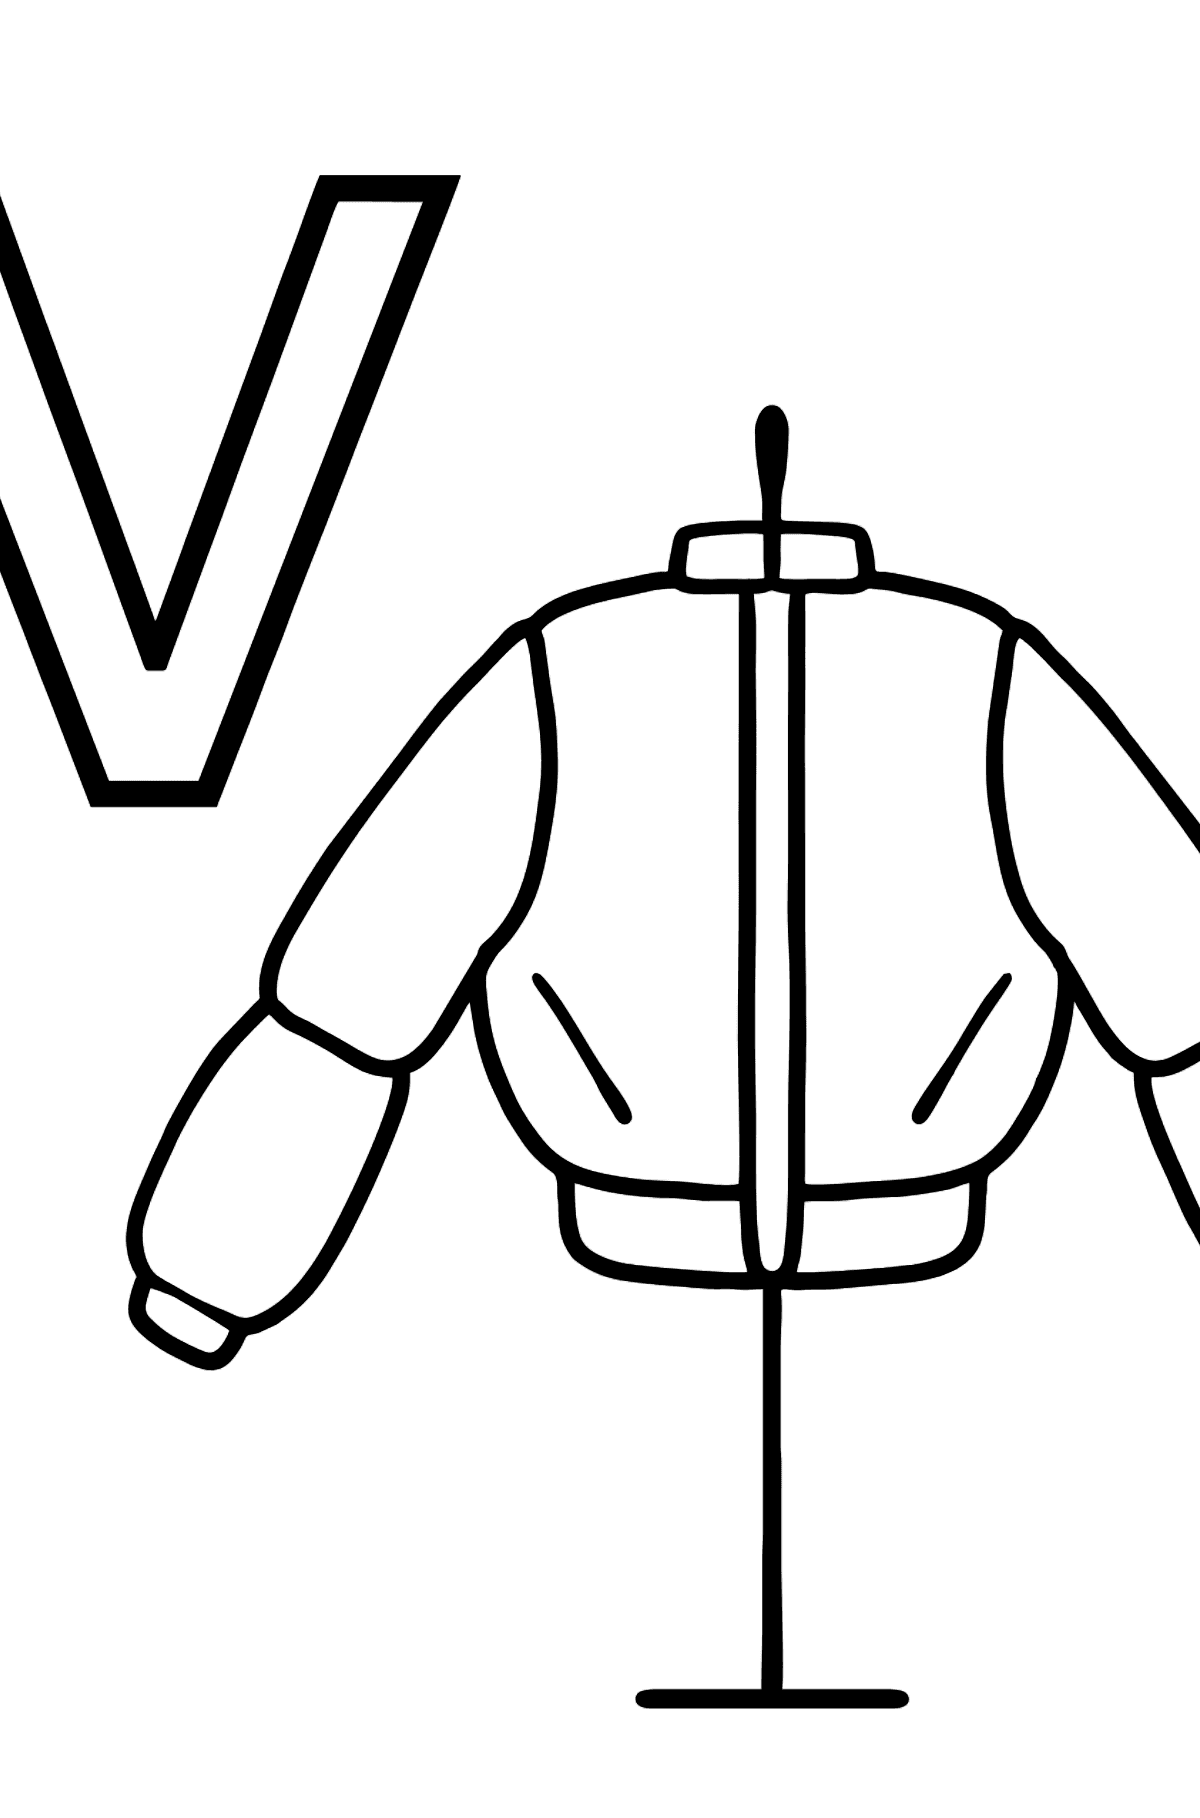 French Letter V coloring pages - VESTE - Coloring Pages for Kids